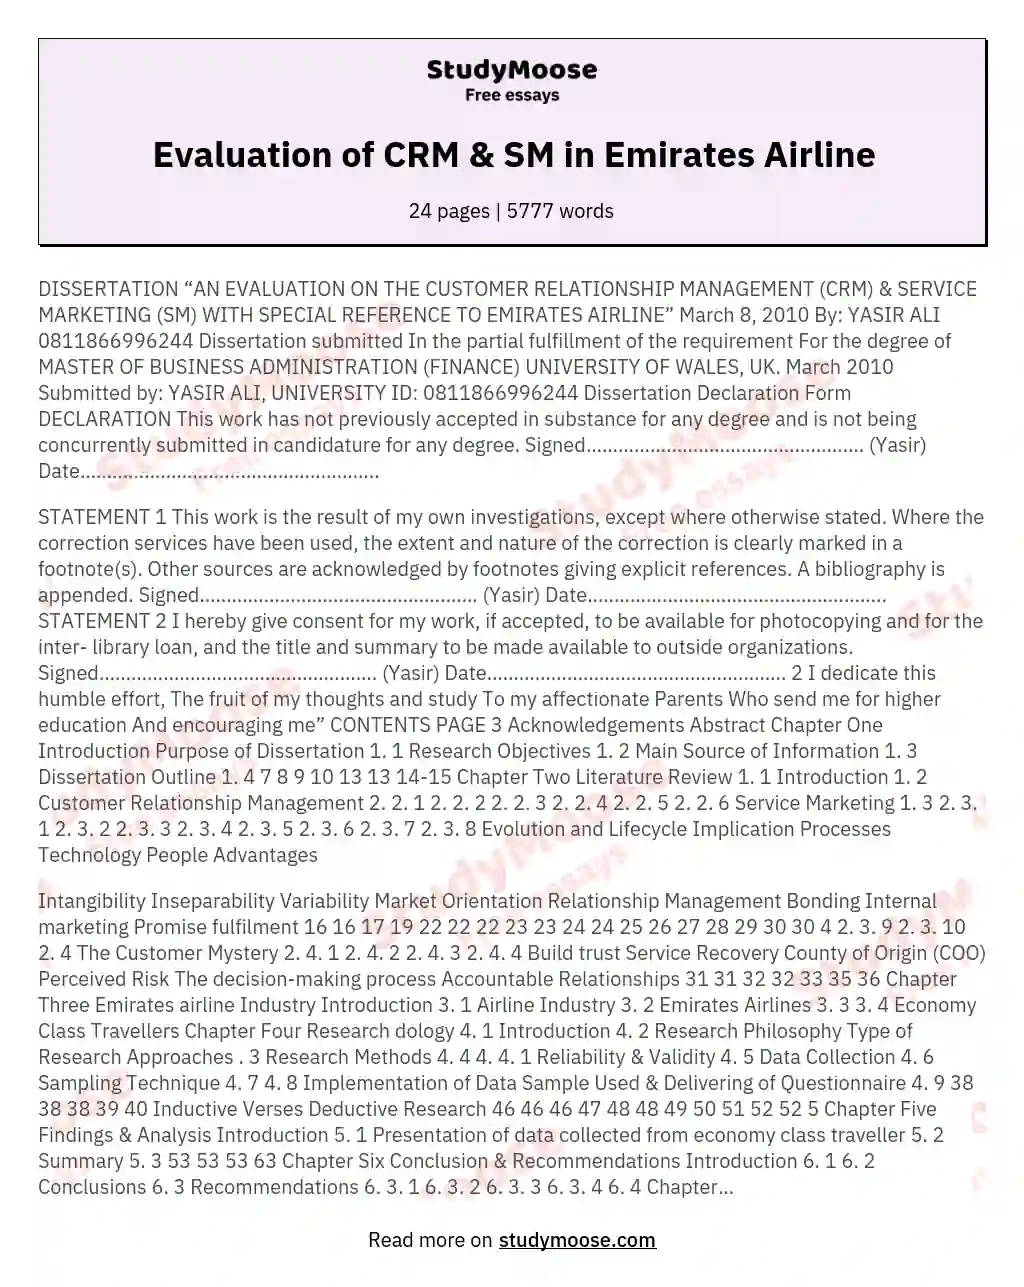 An Evaluation on the Customer Relationship Management (Crm) & Service Marketing (Sm) with Special Reference to Emirates Airline”